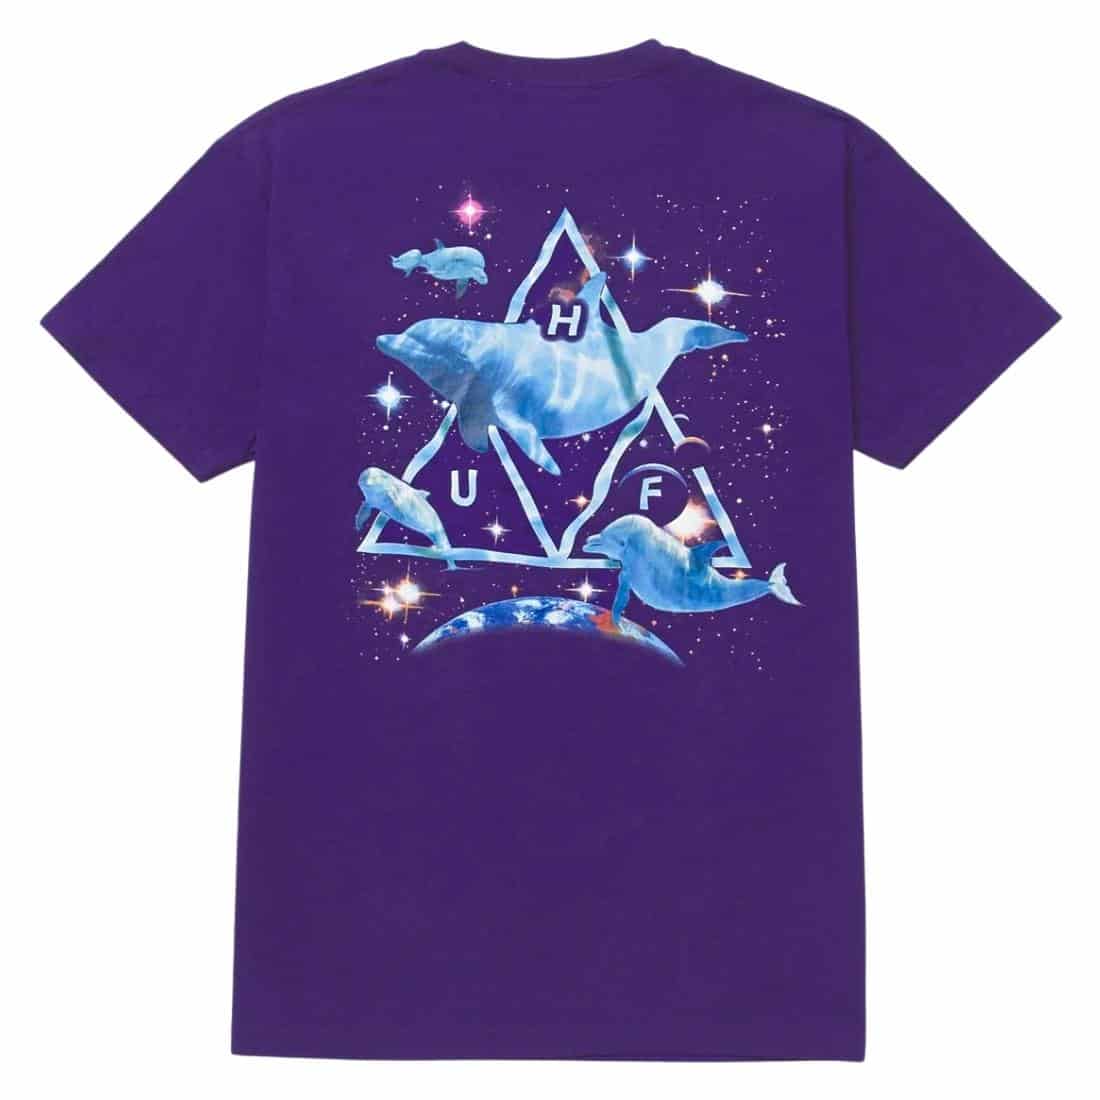 Huf Space Dolphins Washed T-Shirt - Purple - Mens Skate Brand T-Shirt by Huf